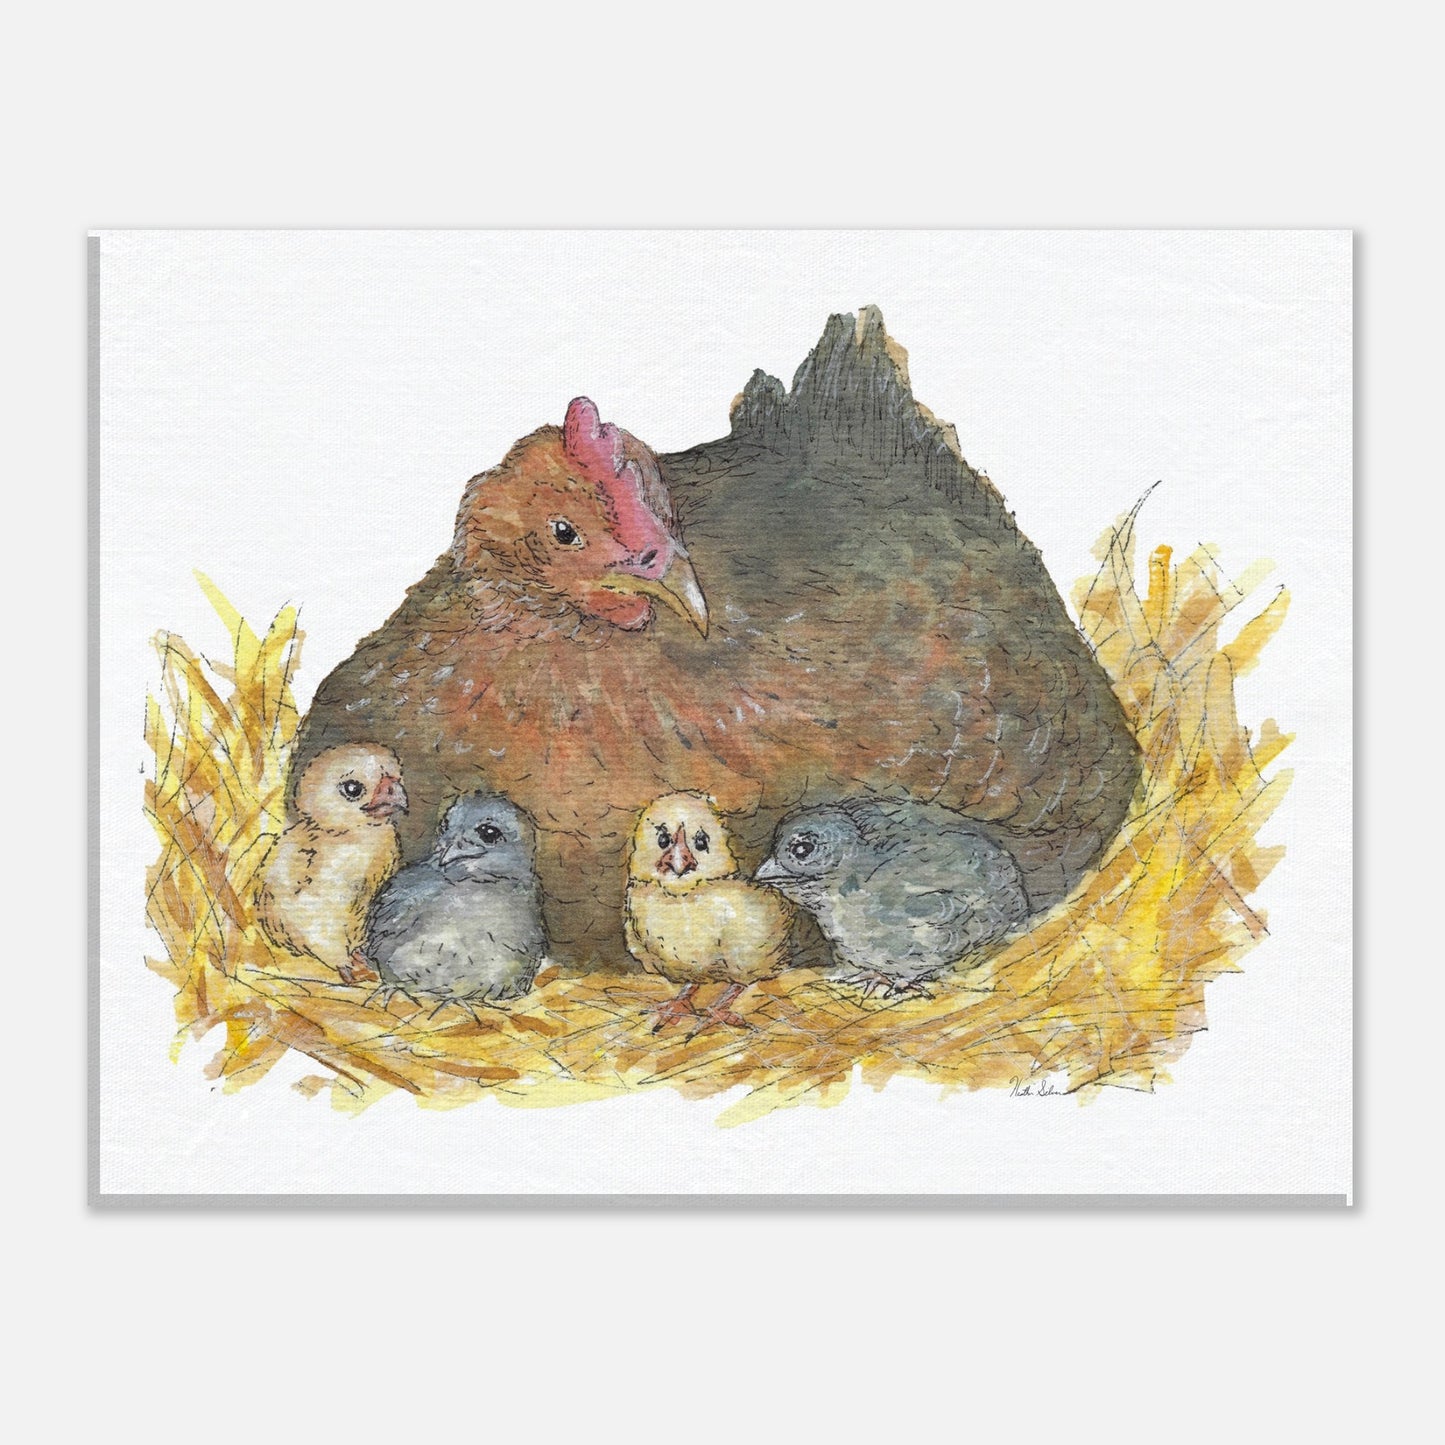 8 by 10 inch slim canvas Mother Hen print. Features a watercolor mother hen and her four chicks in a nest.